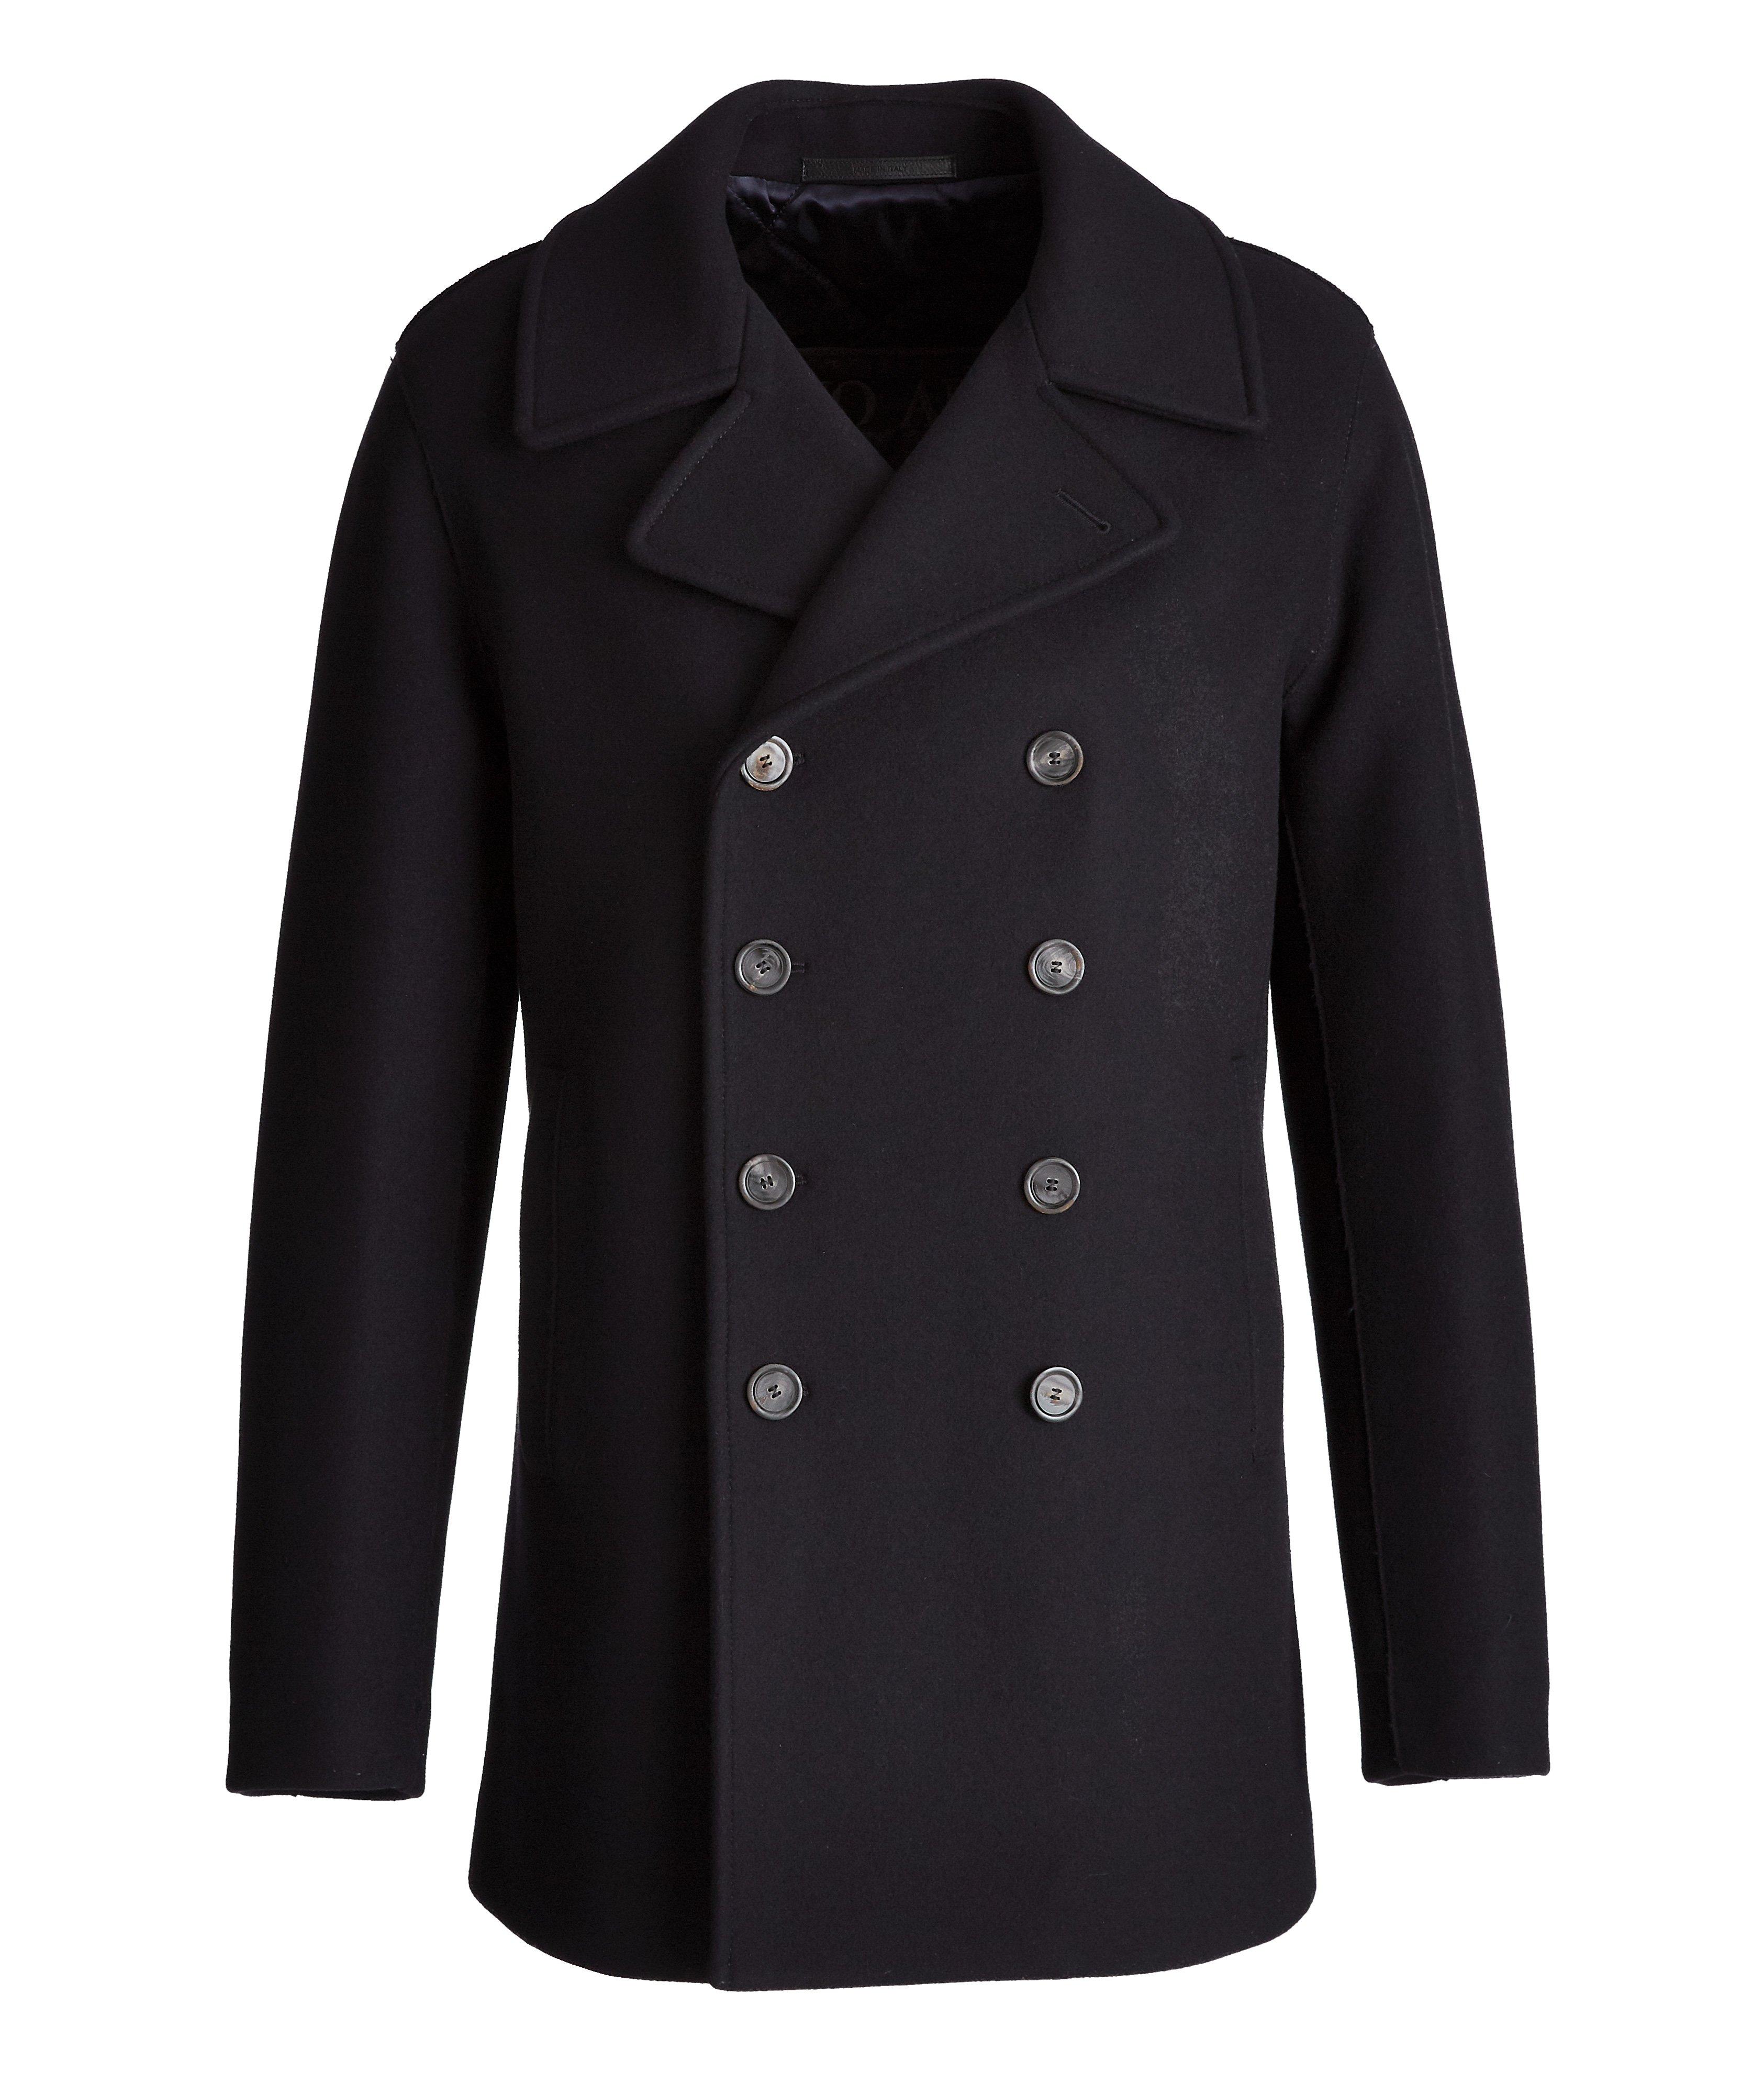 Caban Double-Breasted Wool-Cashmere Peacoat  image 0